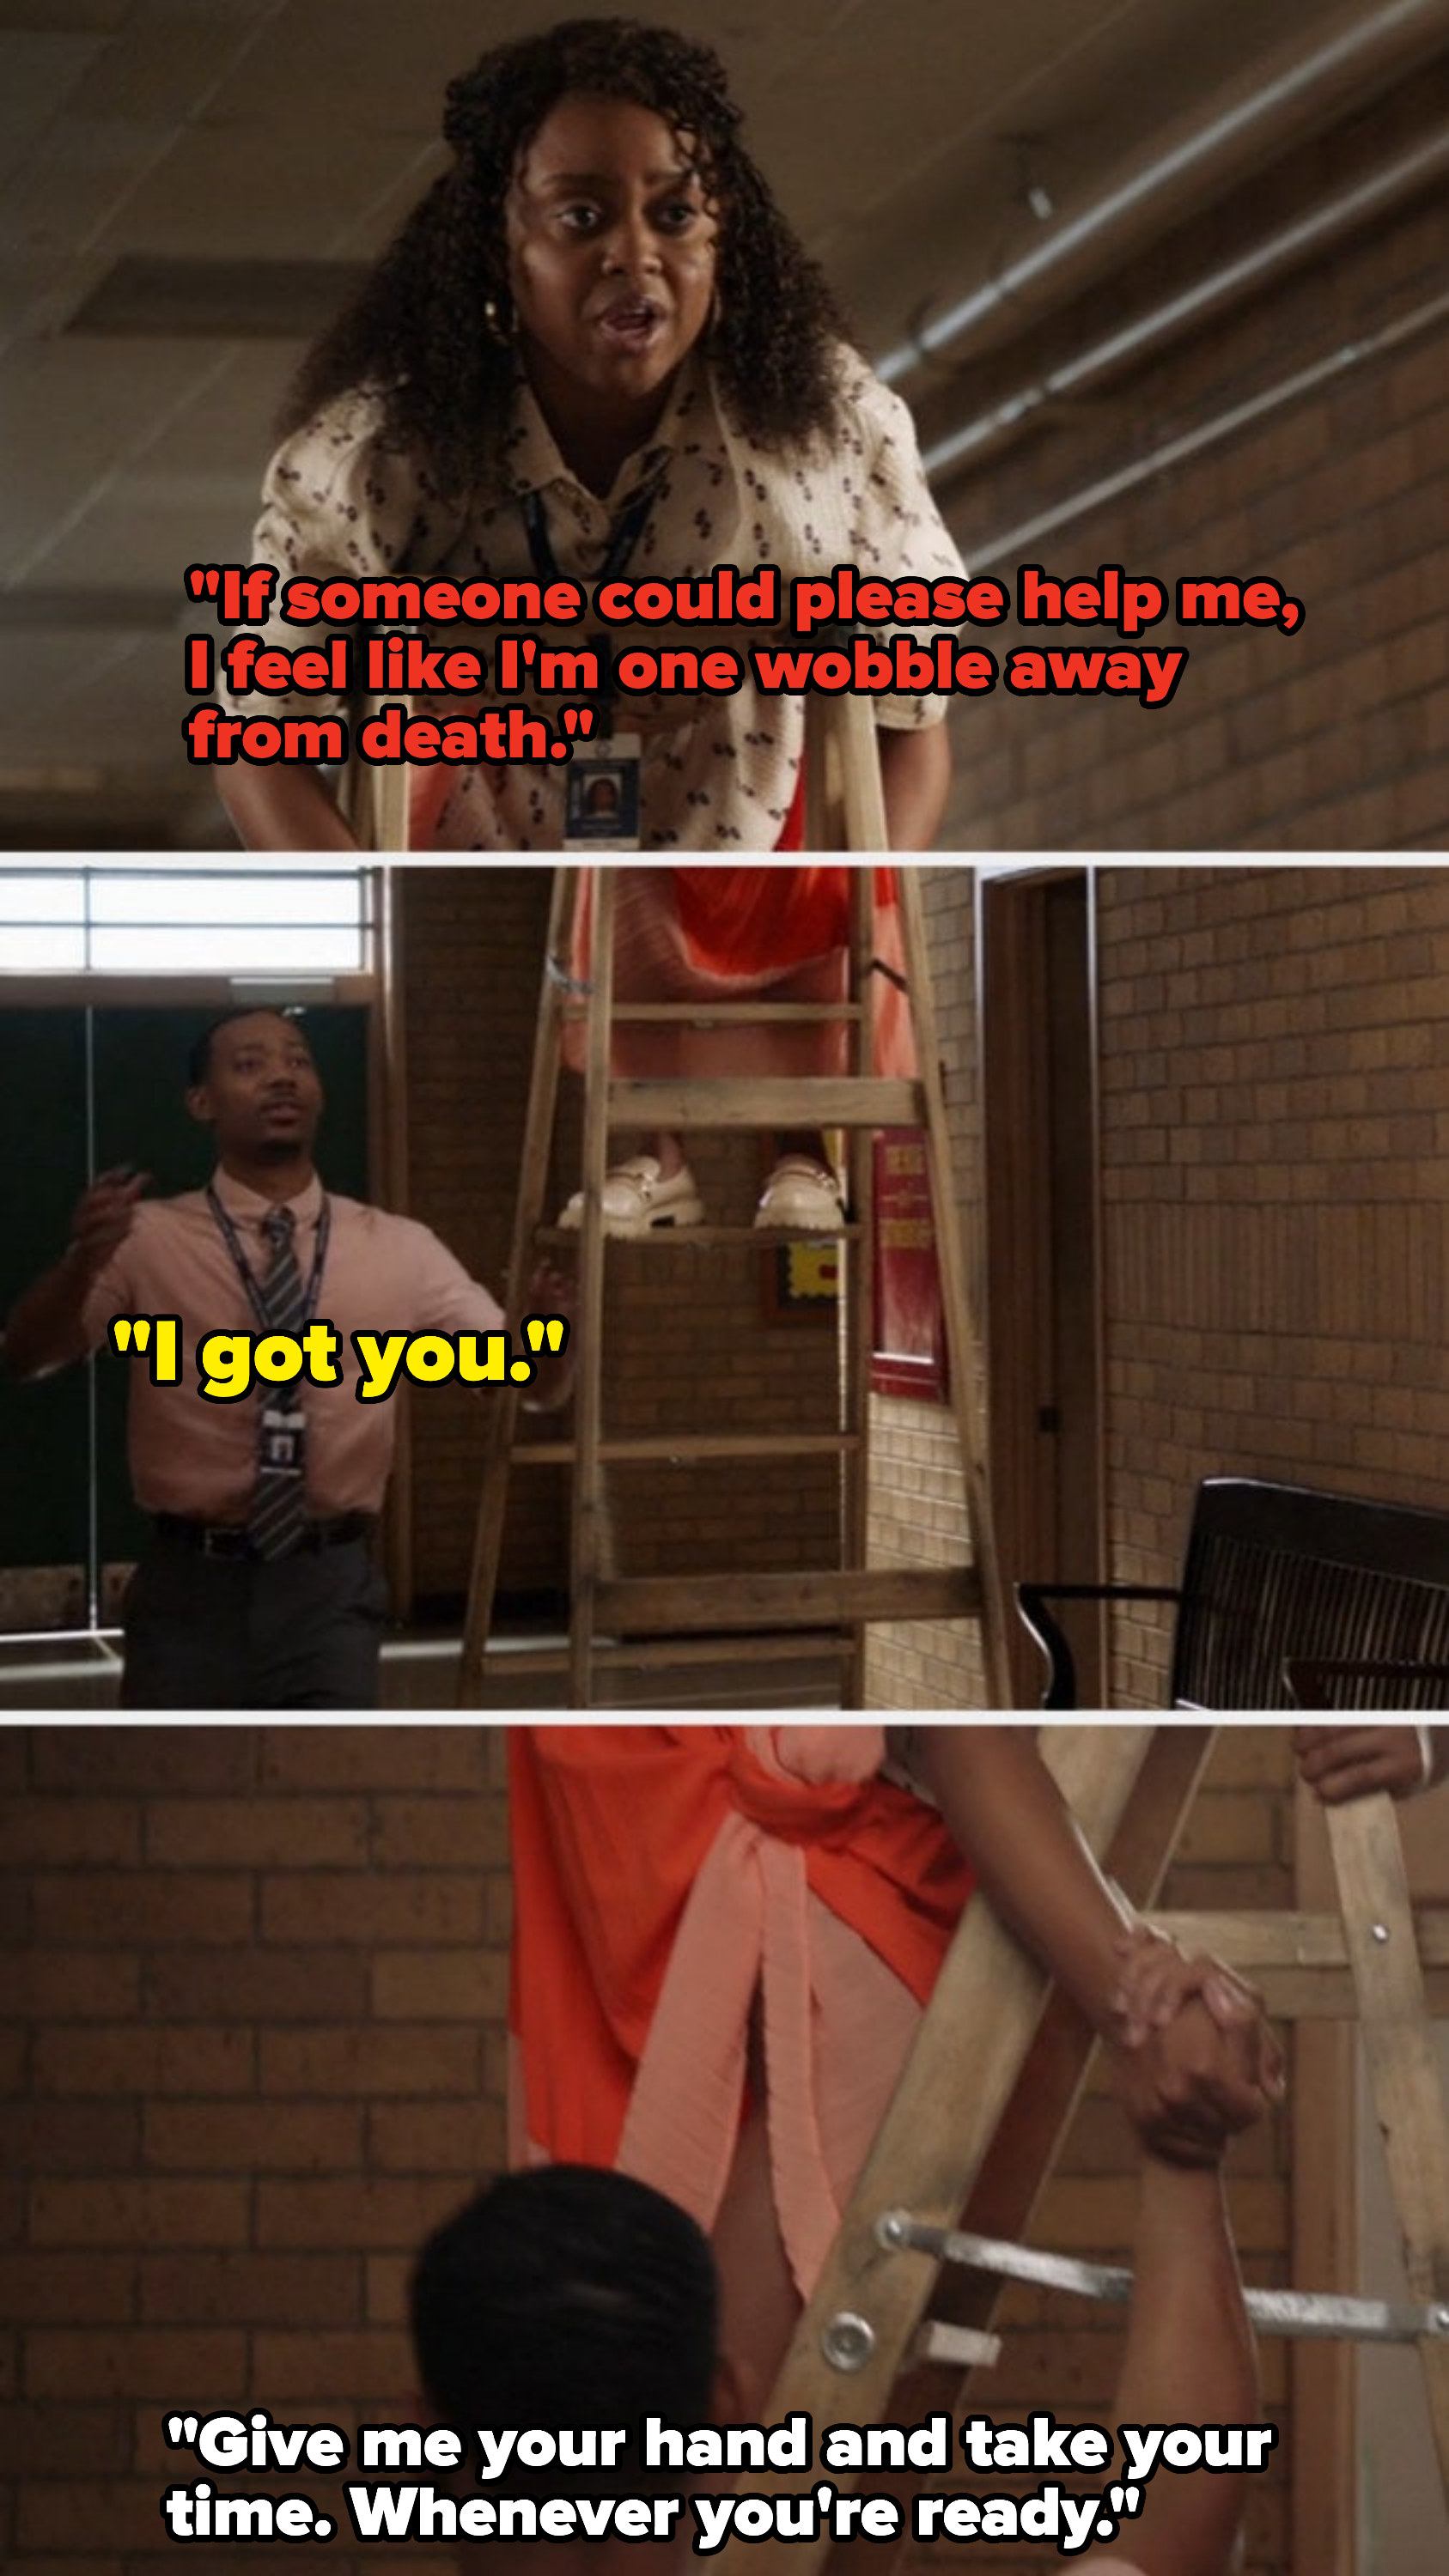 Gregory helps Janine get down from a ladder